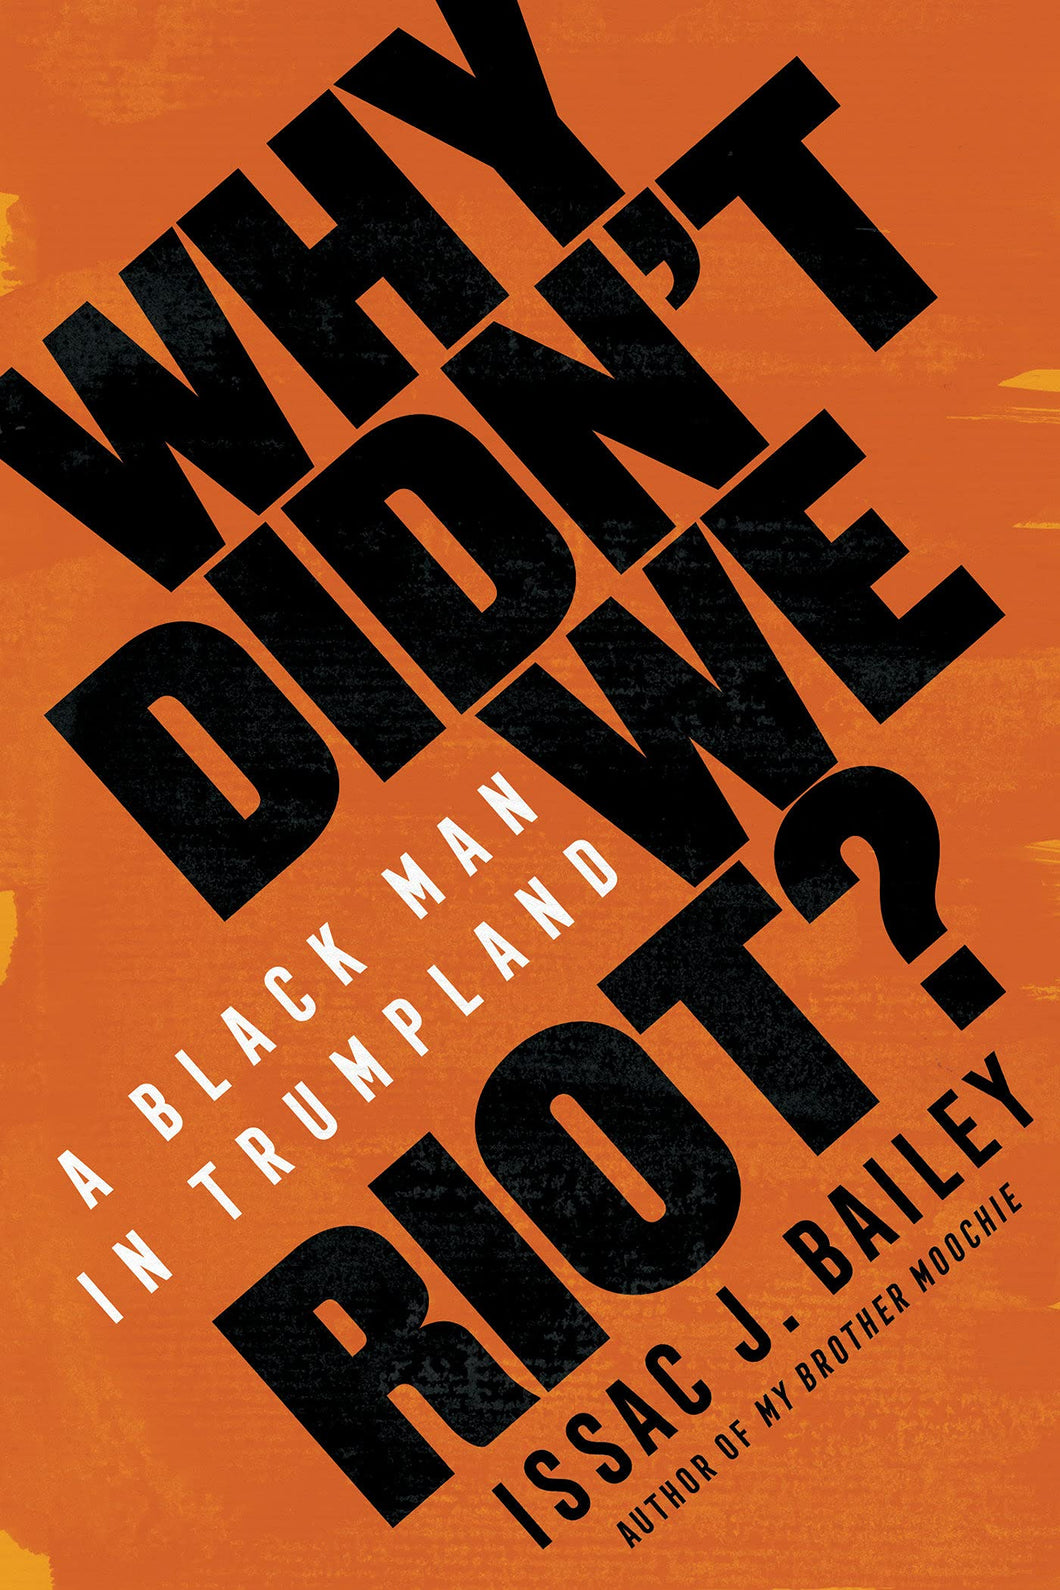 Why Didn't We Riot?: A Black Man in Trumpland by Issac J. Bailey